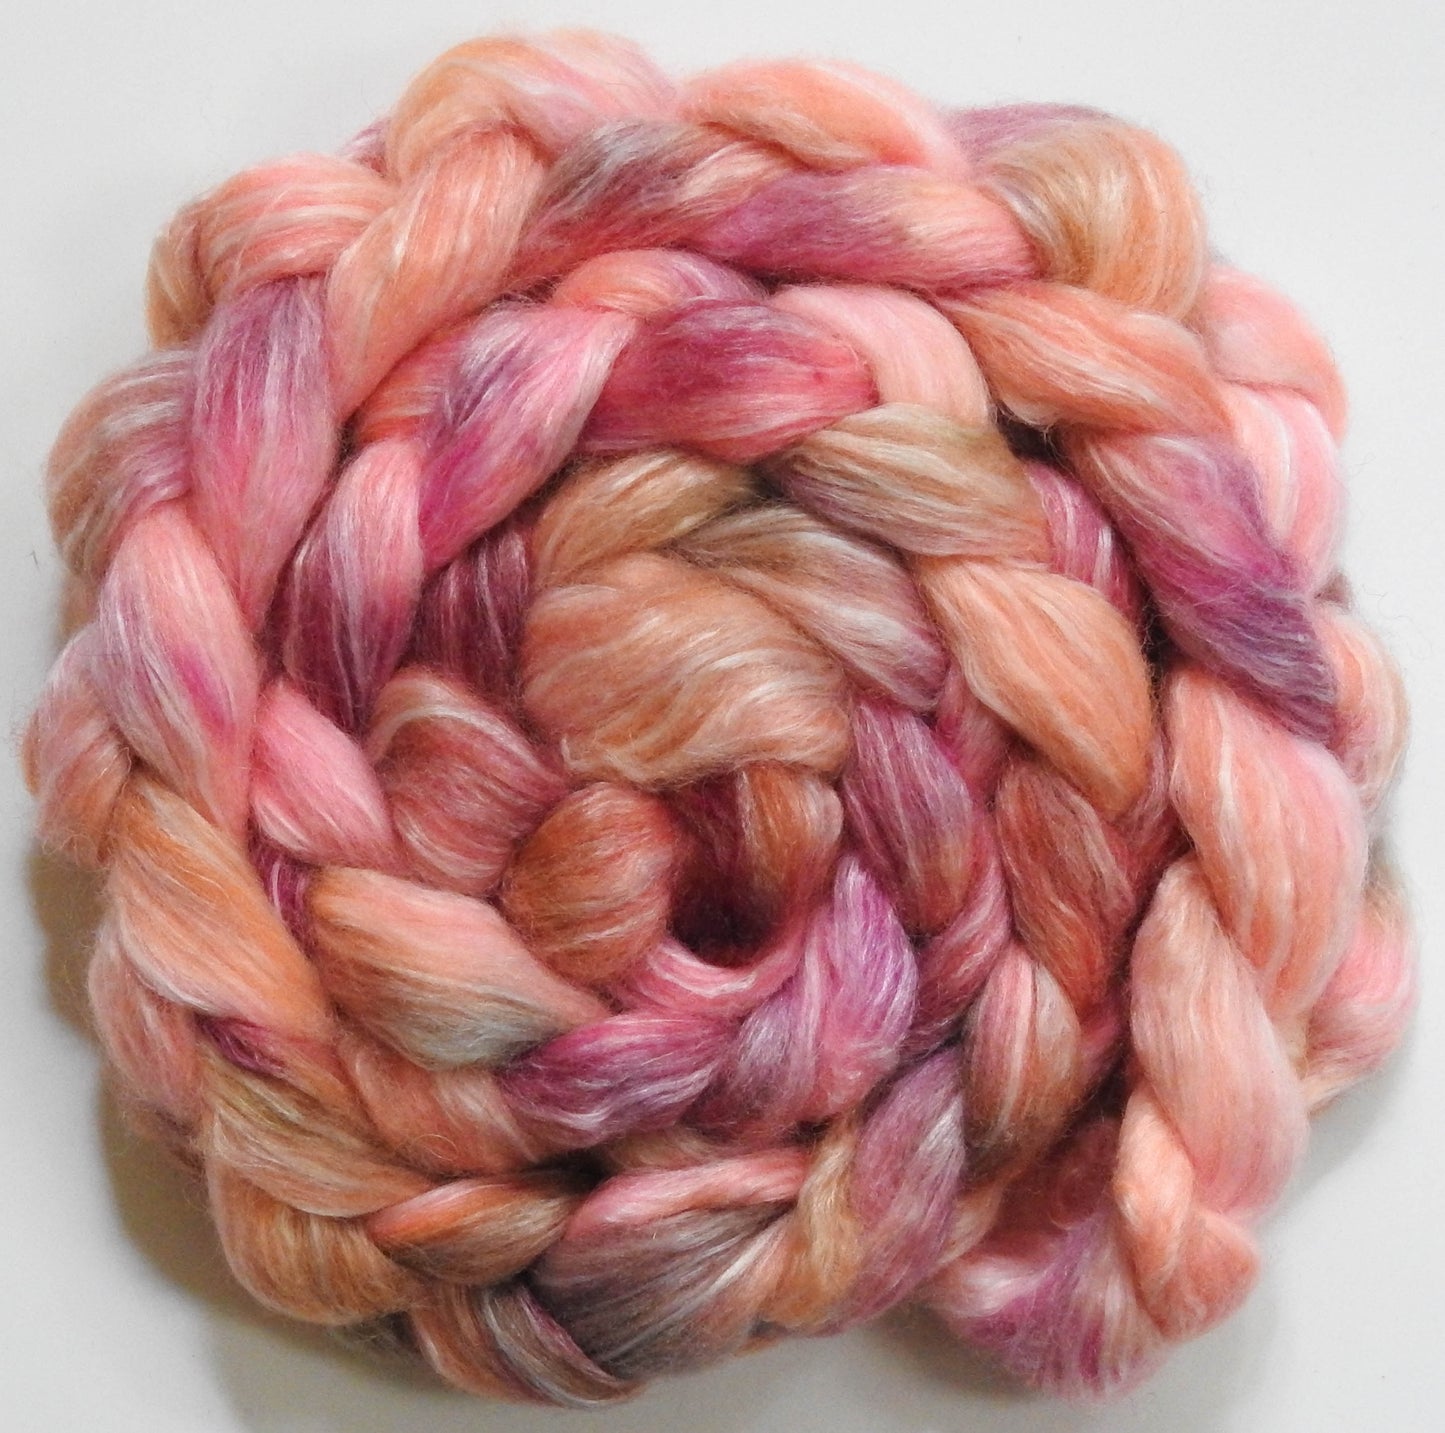 In the Pink (5.7 oz.)- White-faced Woodland/ Ramie/ Llama/ Bamboo (35/35/15/15)-